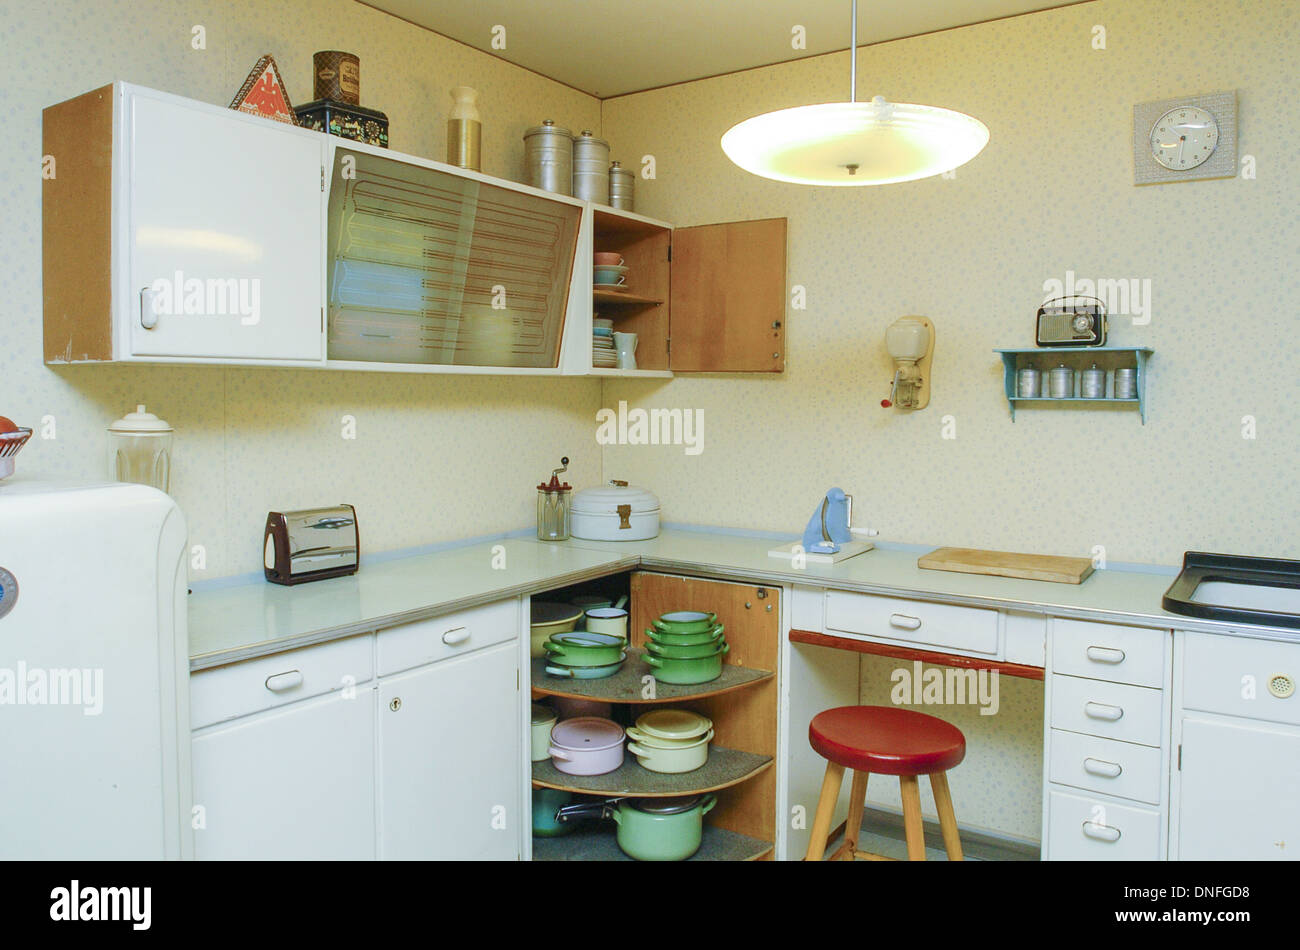 Apartment In 50s Style Kitchen Stock Photo 64881076 Alamy